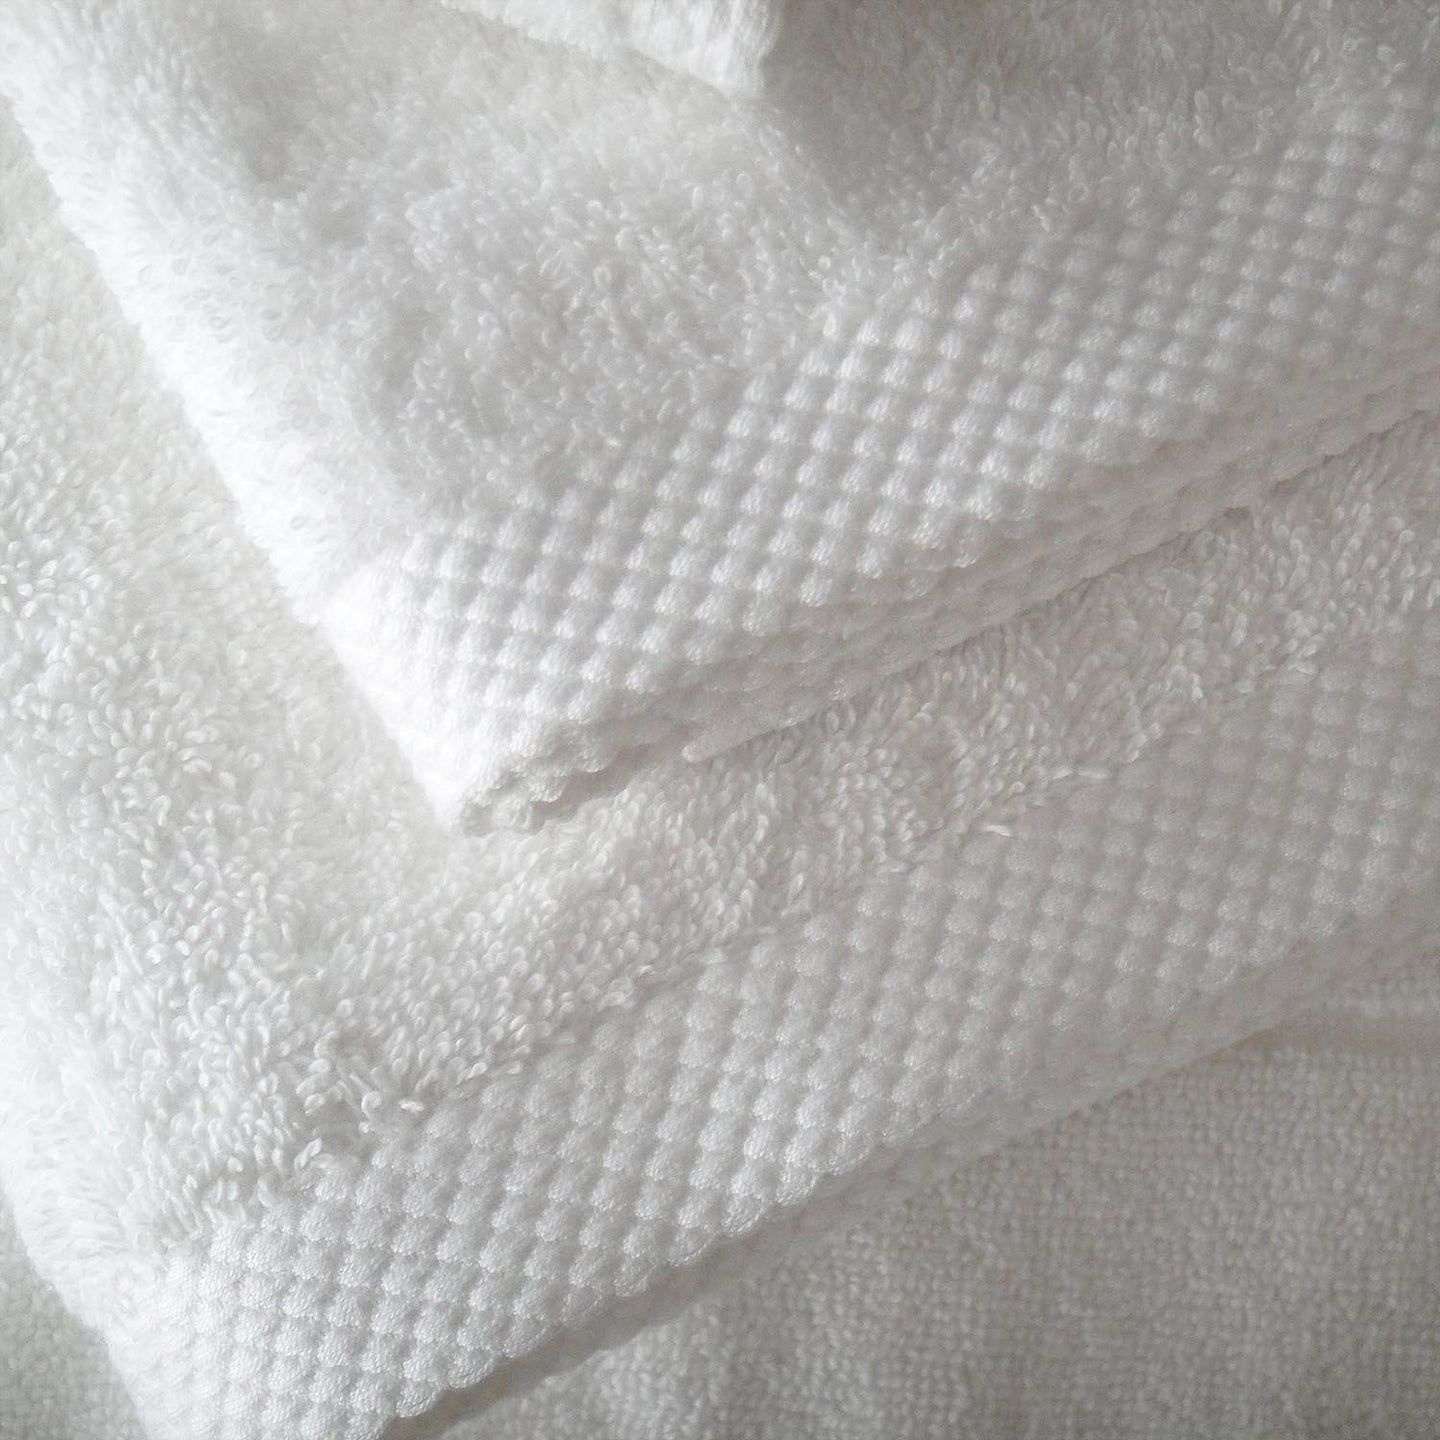 SMARTLINEN® Signature Towel Collection Set (FREE Shipping)